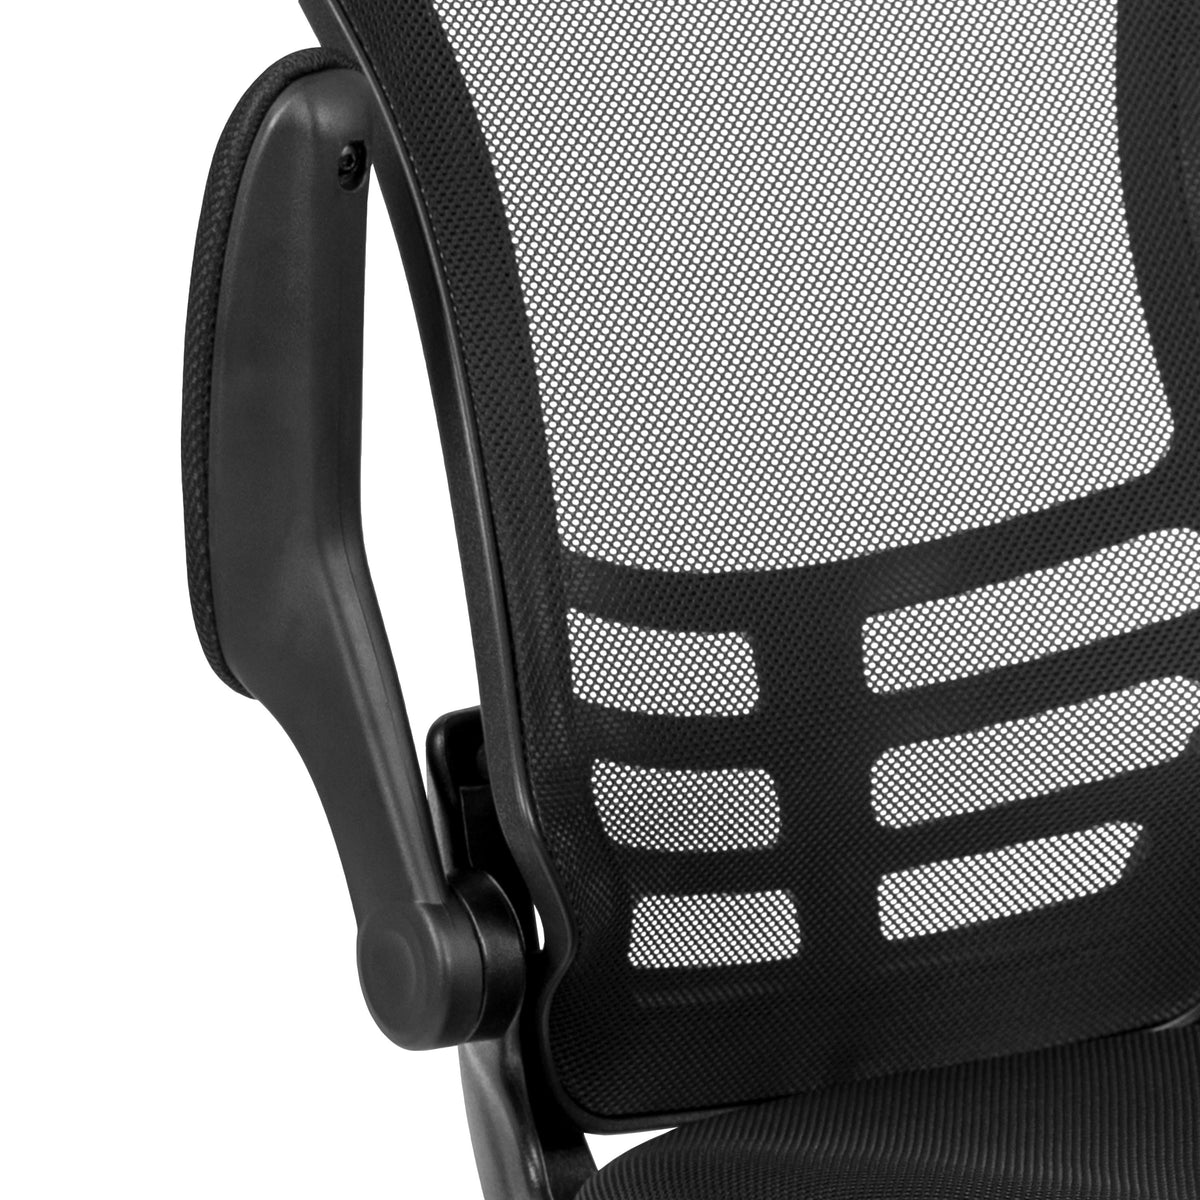 Black Mesh |#| Black Mesh Sled Base Side Reception Chair with Flip-Up Arms-Office Waiting Room